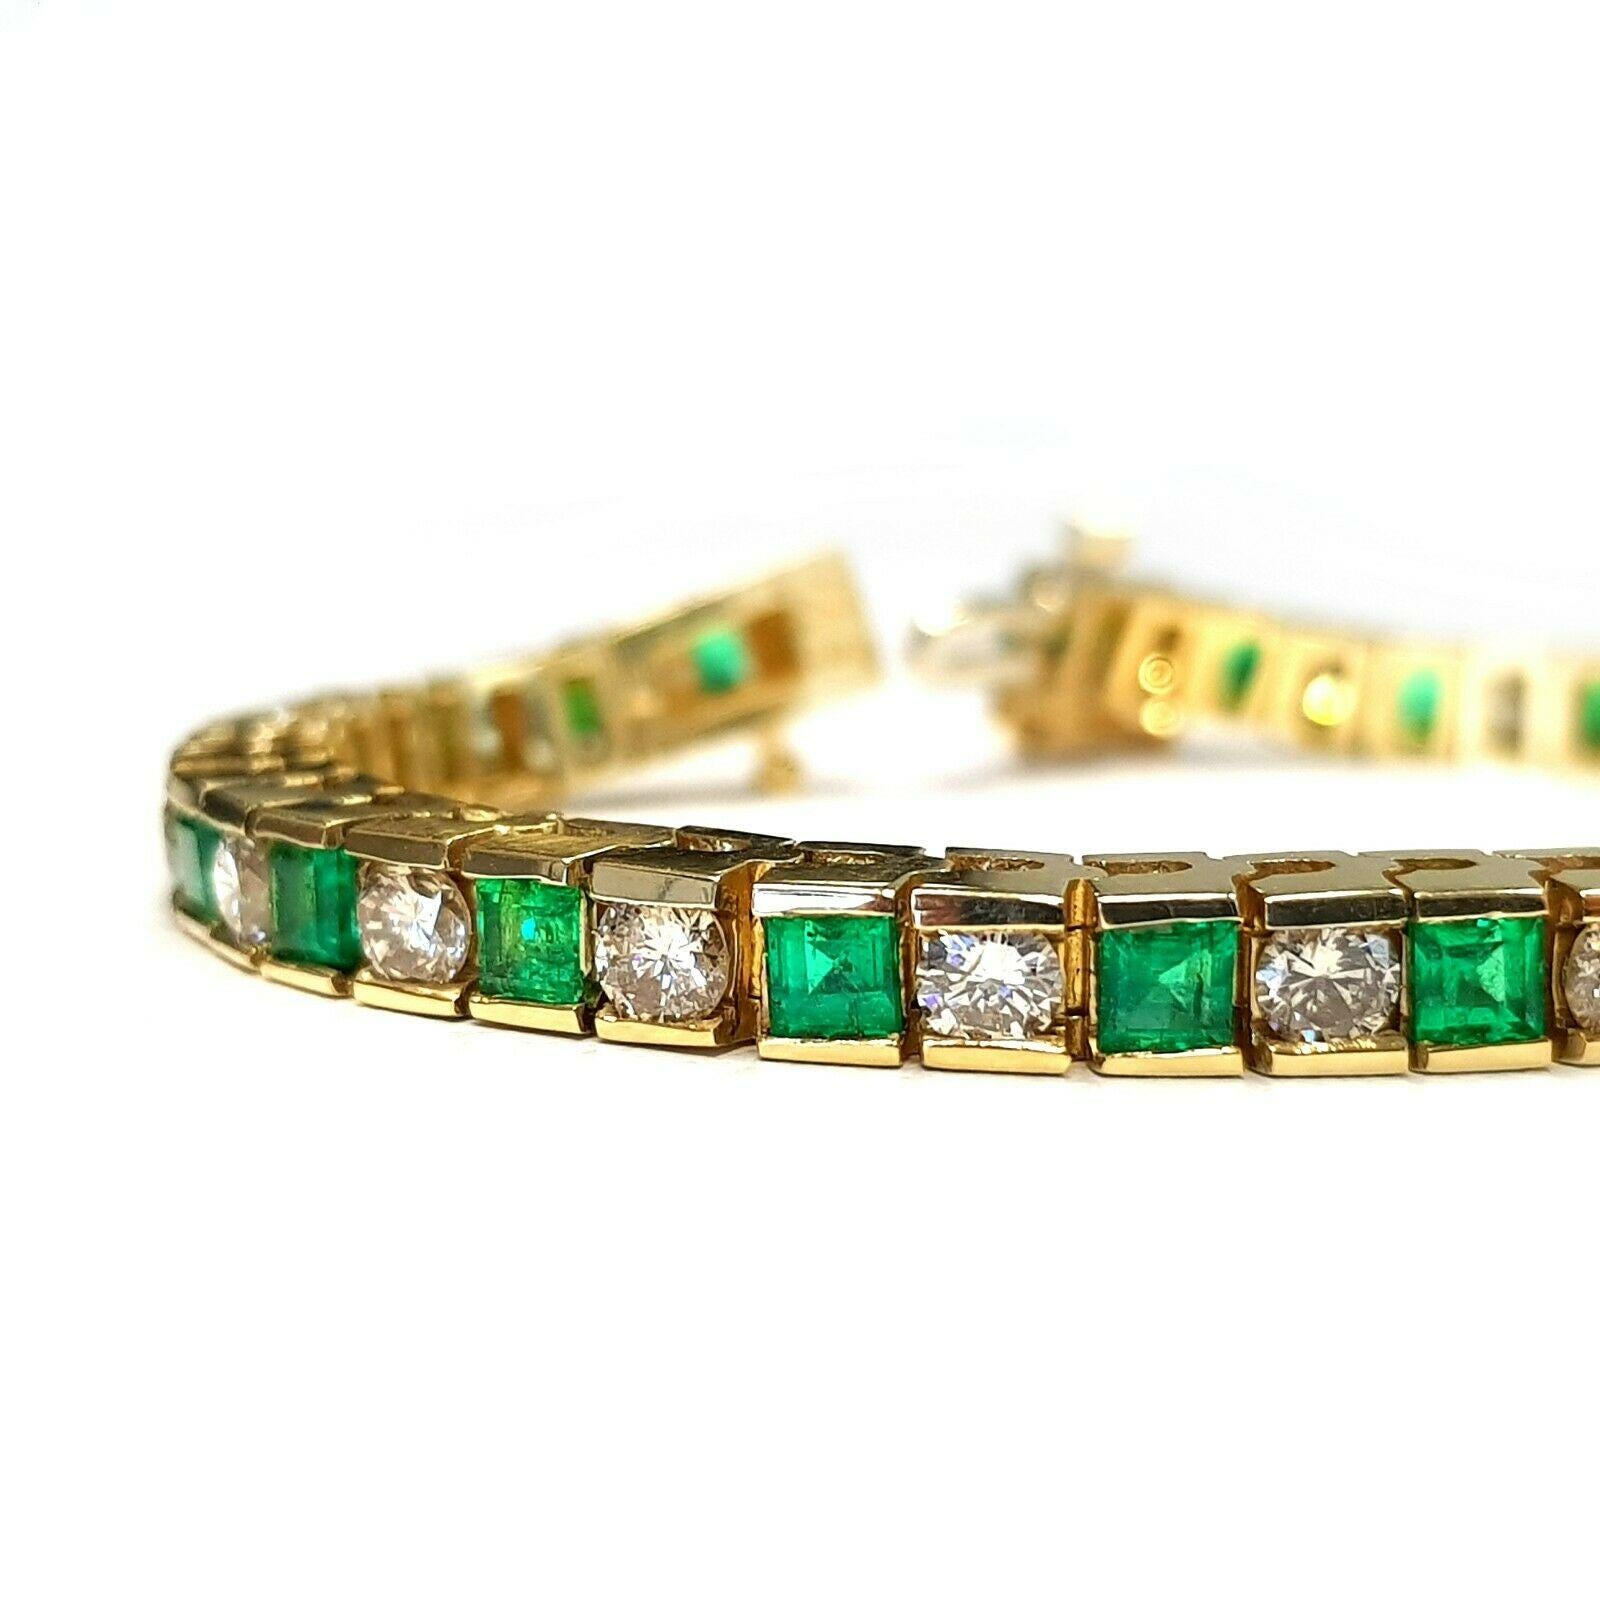 This is very beautiful 14k yellow gold custom made bracelet with very clean princess cut emeralds and round diamonds.  the bracelet is 6.5 inches long.
Specifications: 
•	main stone: EMERALD  6 ct/ 24 PCS 
•	additional: DIAMONDS 
•	diamonds: 24 PCS